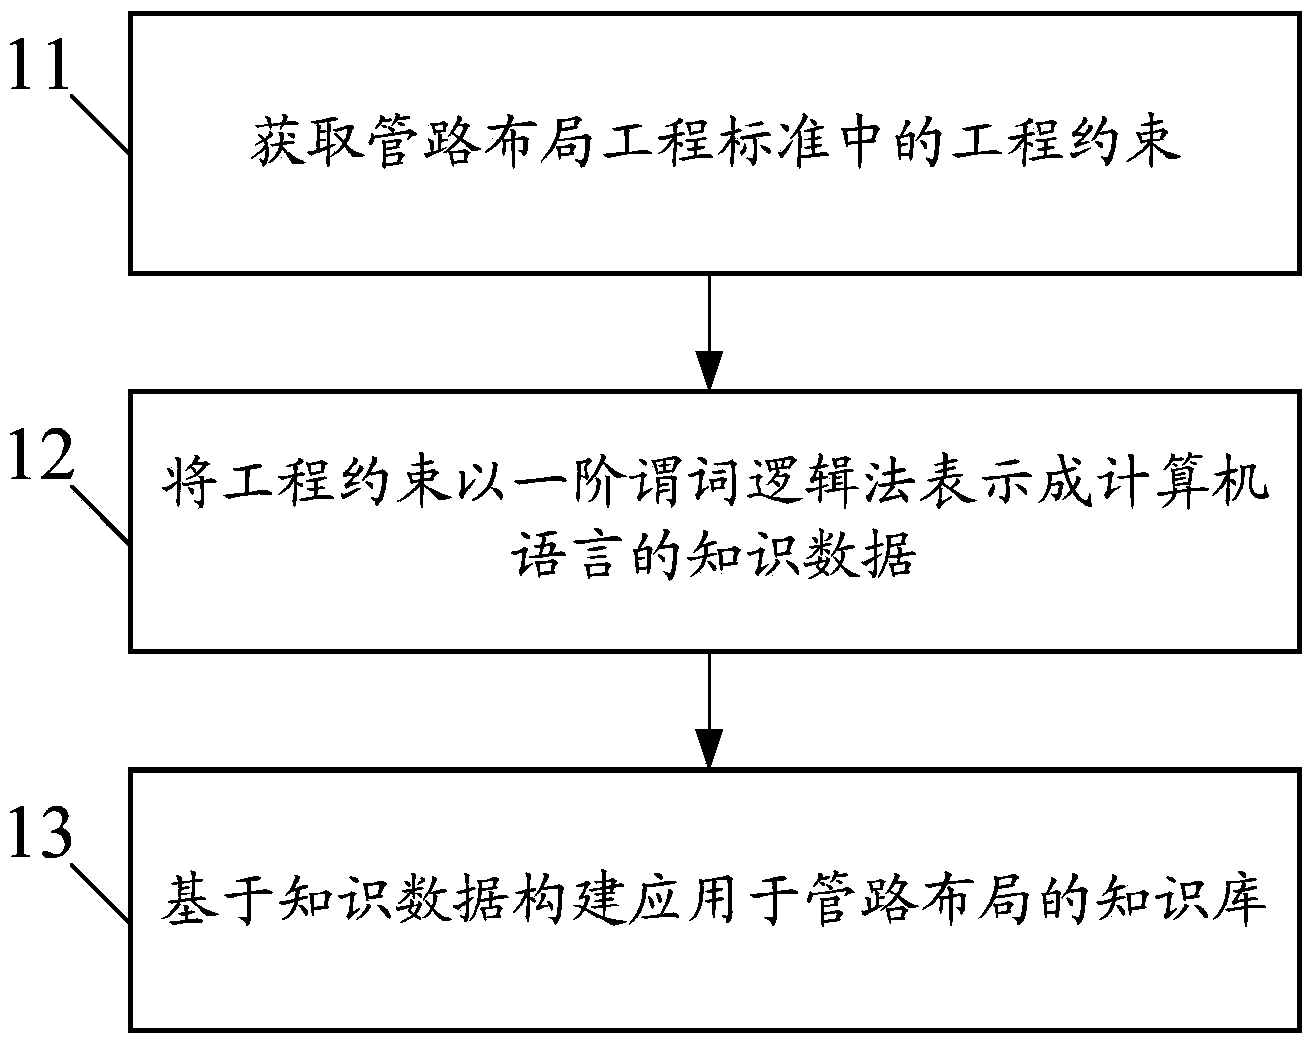 Method for establishing knowledge base and method and device for evaluating piping layout